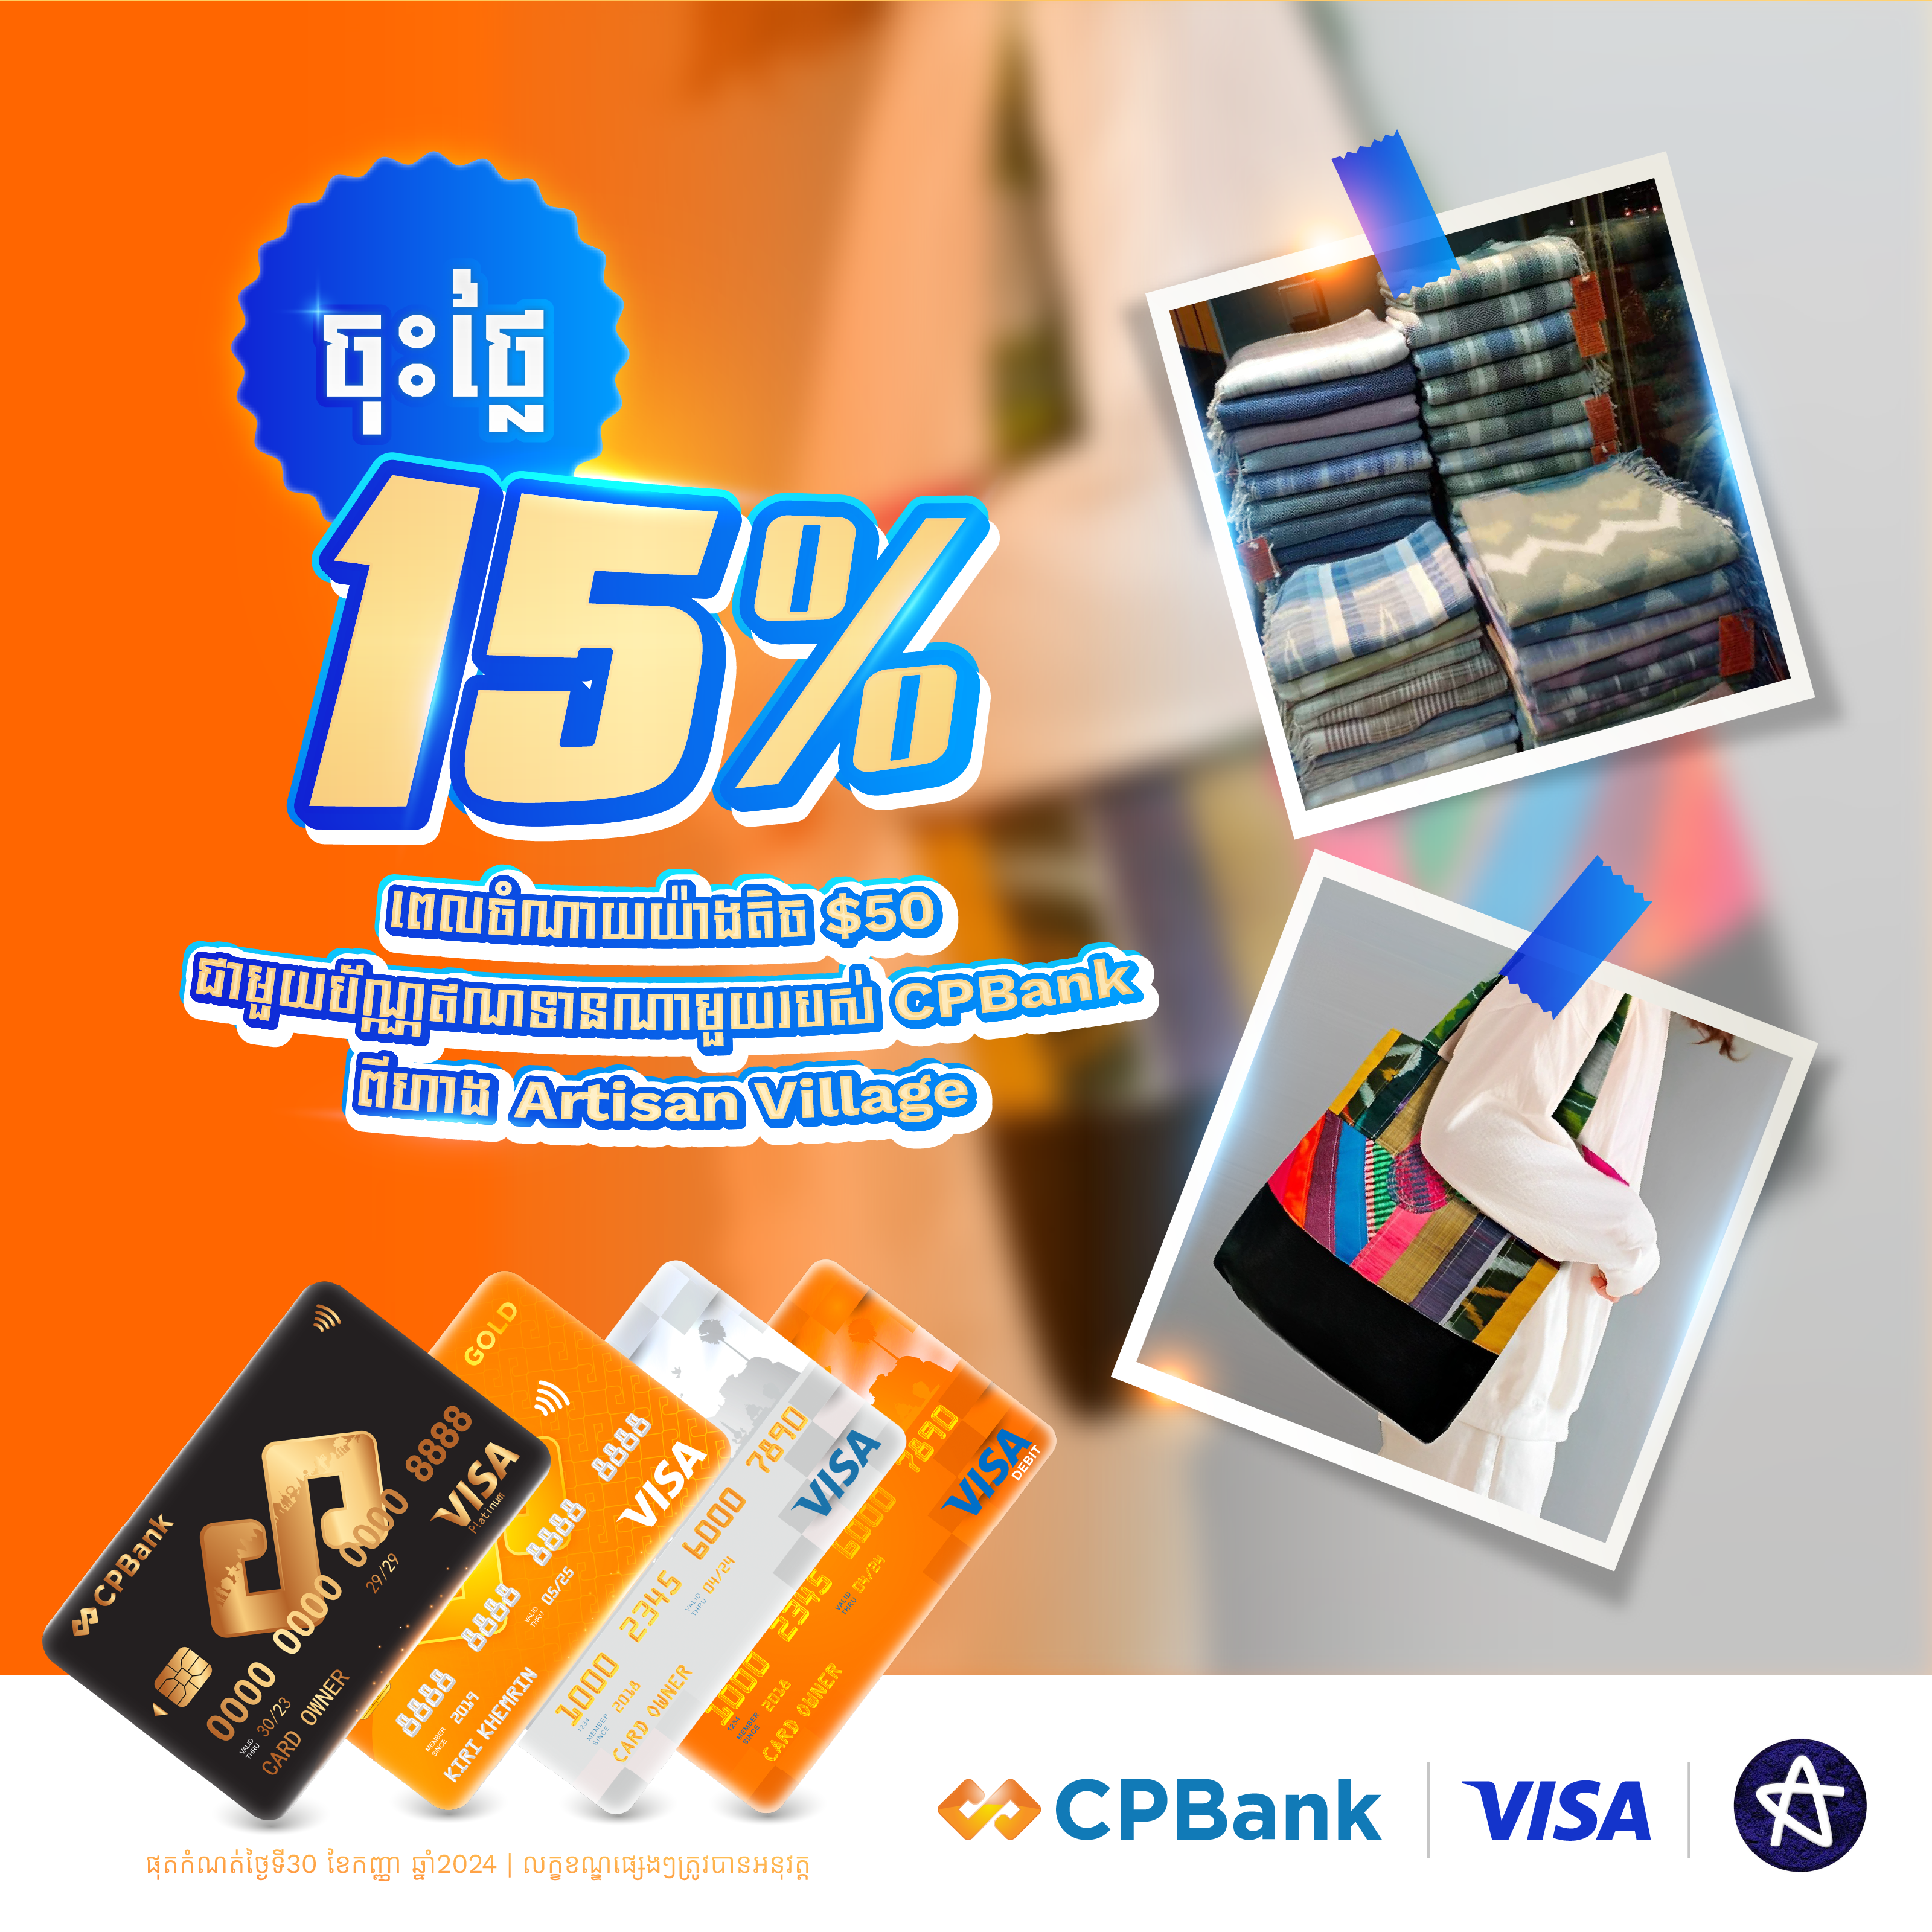 Get 15% off from Artisan Village with CPBank VISA Cards